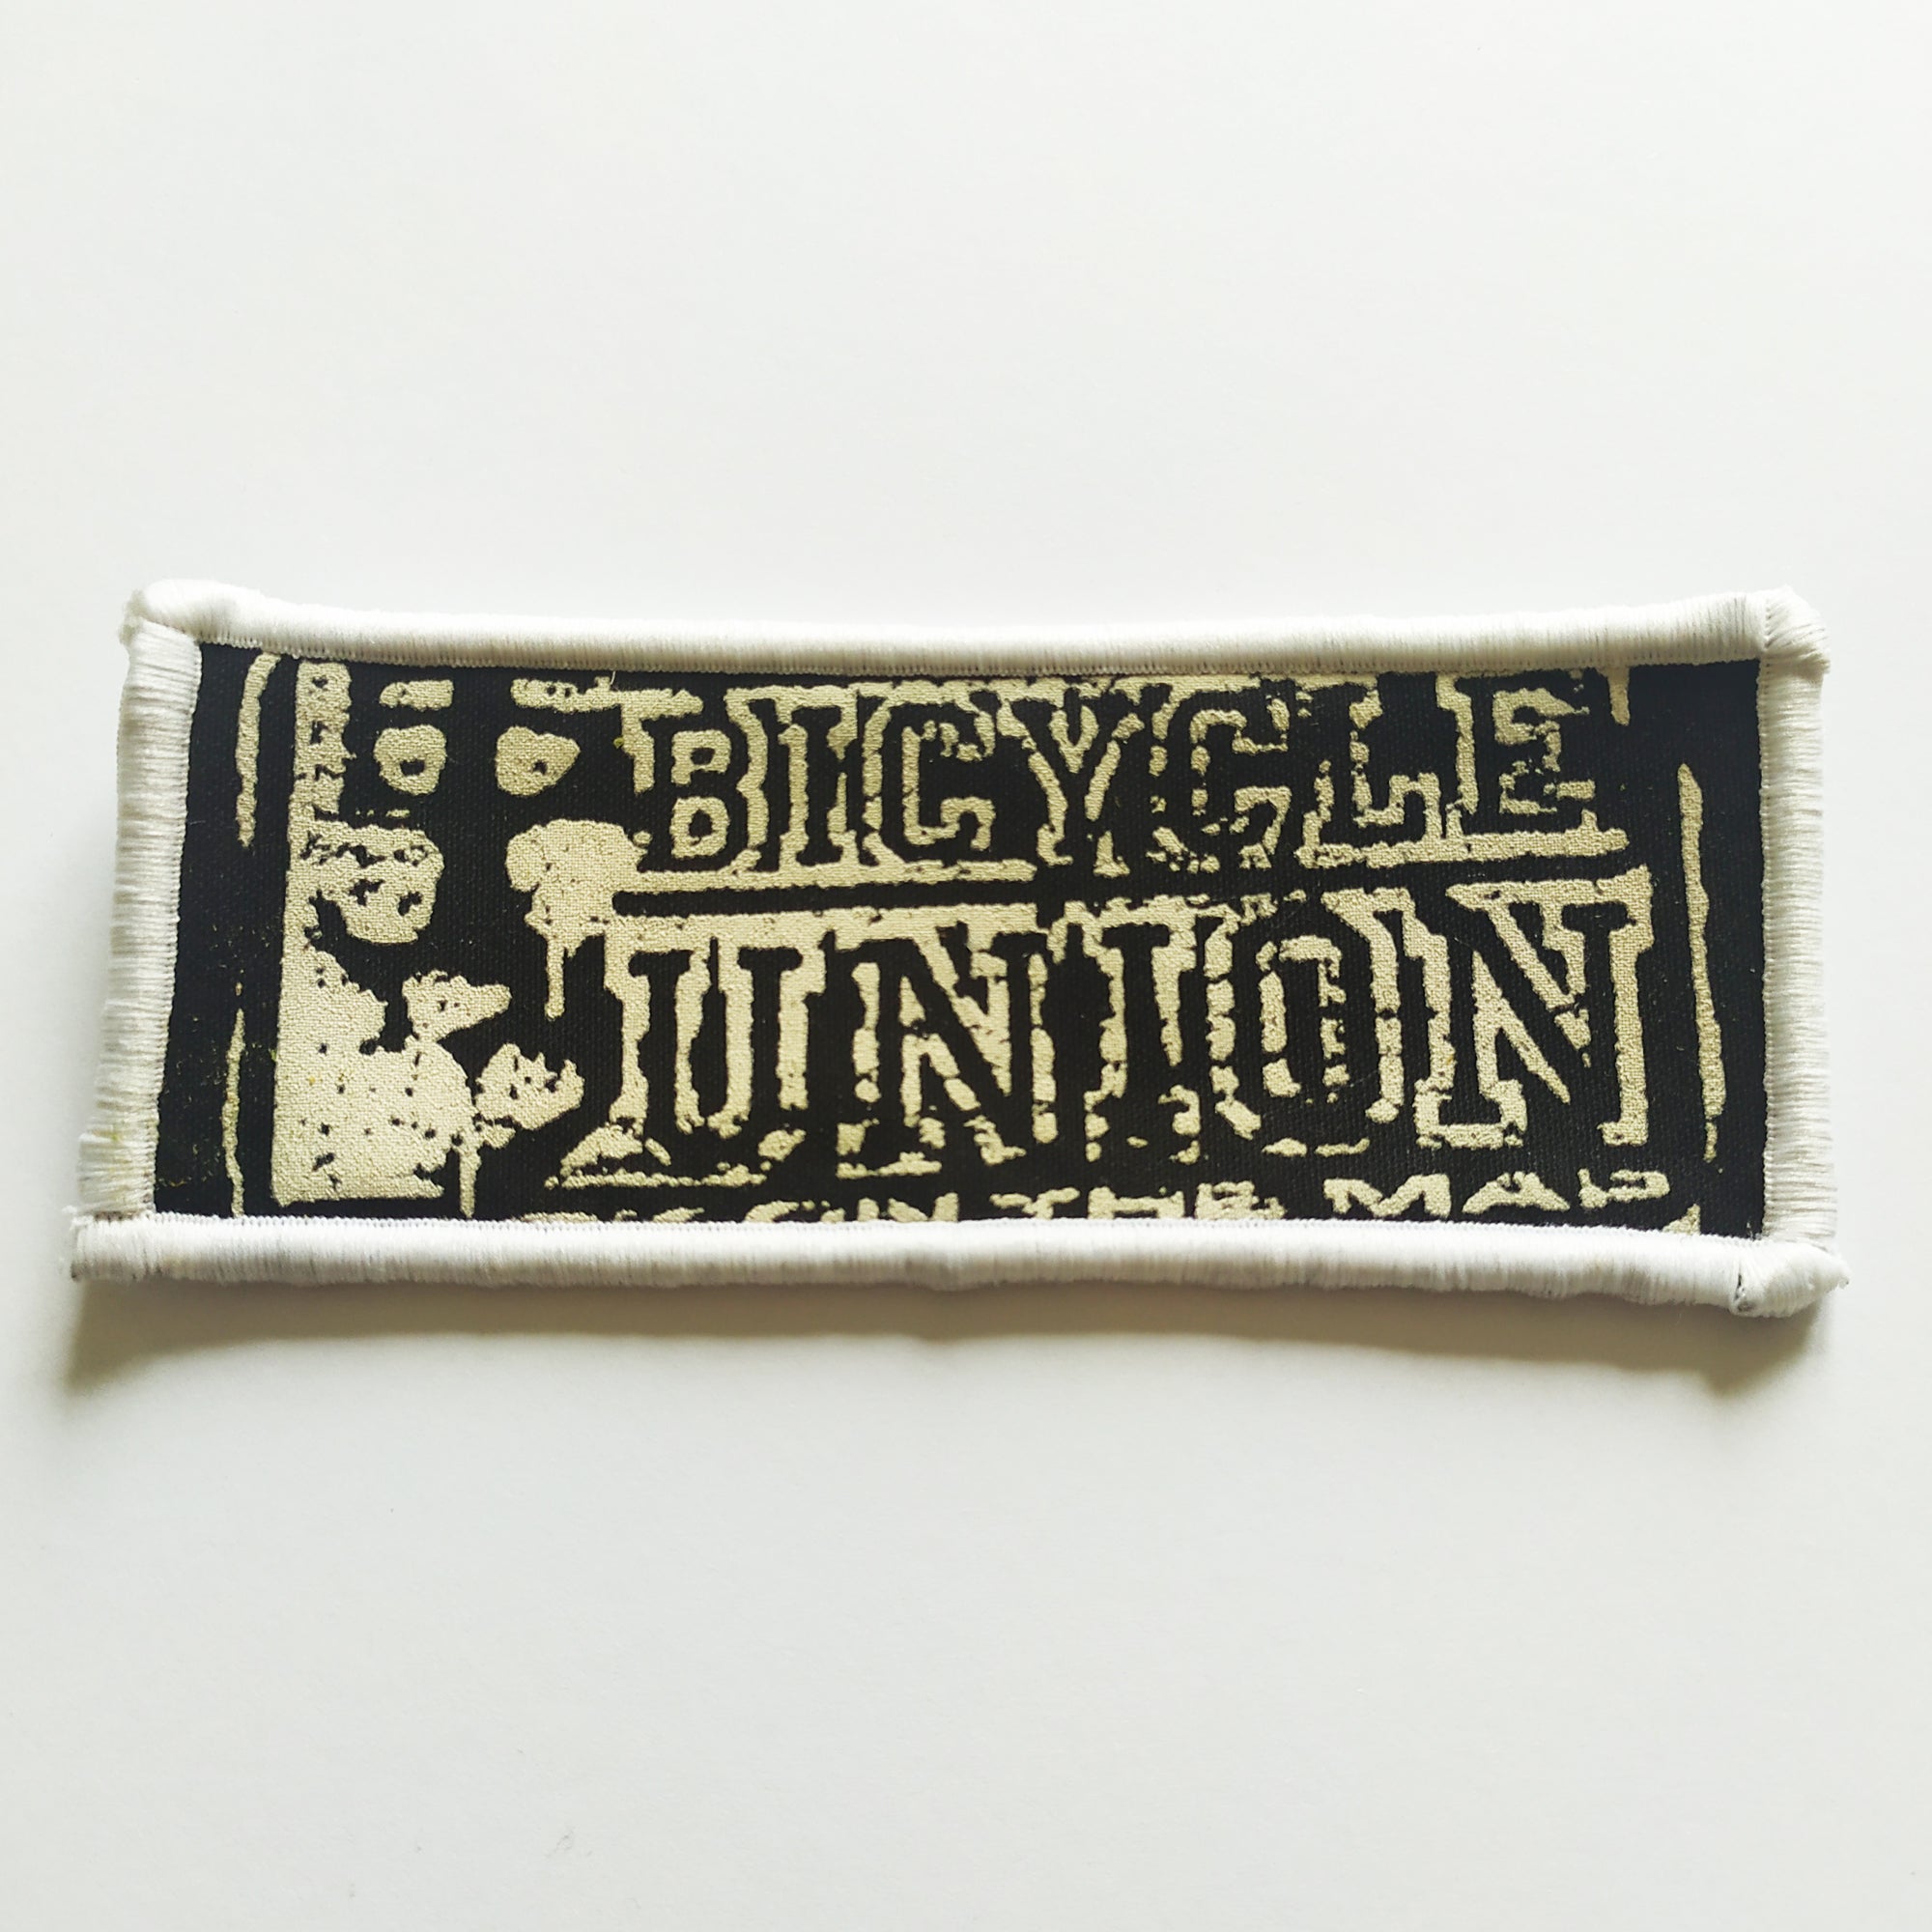 Bicycle Union "Back on the Map" BMX Patch - SkateboardStickers.com